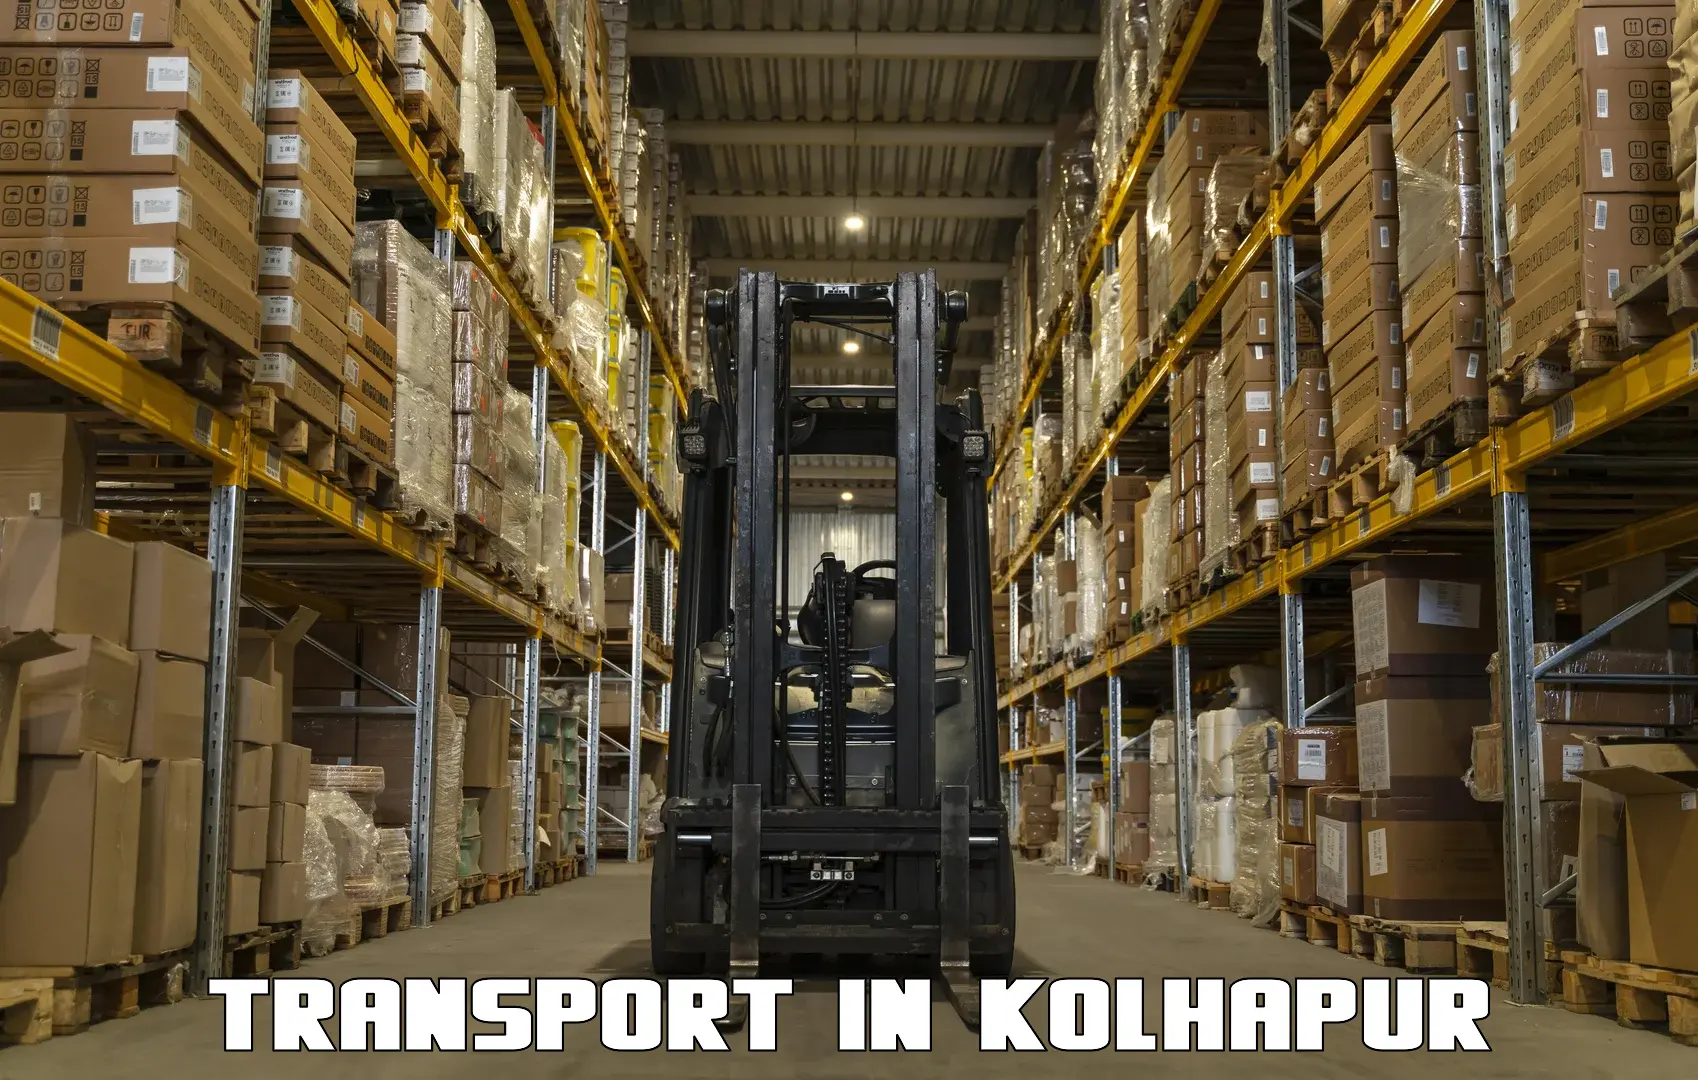 Domestic transport services in Kolhapur